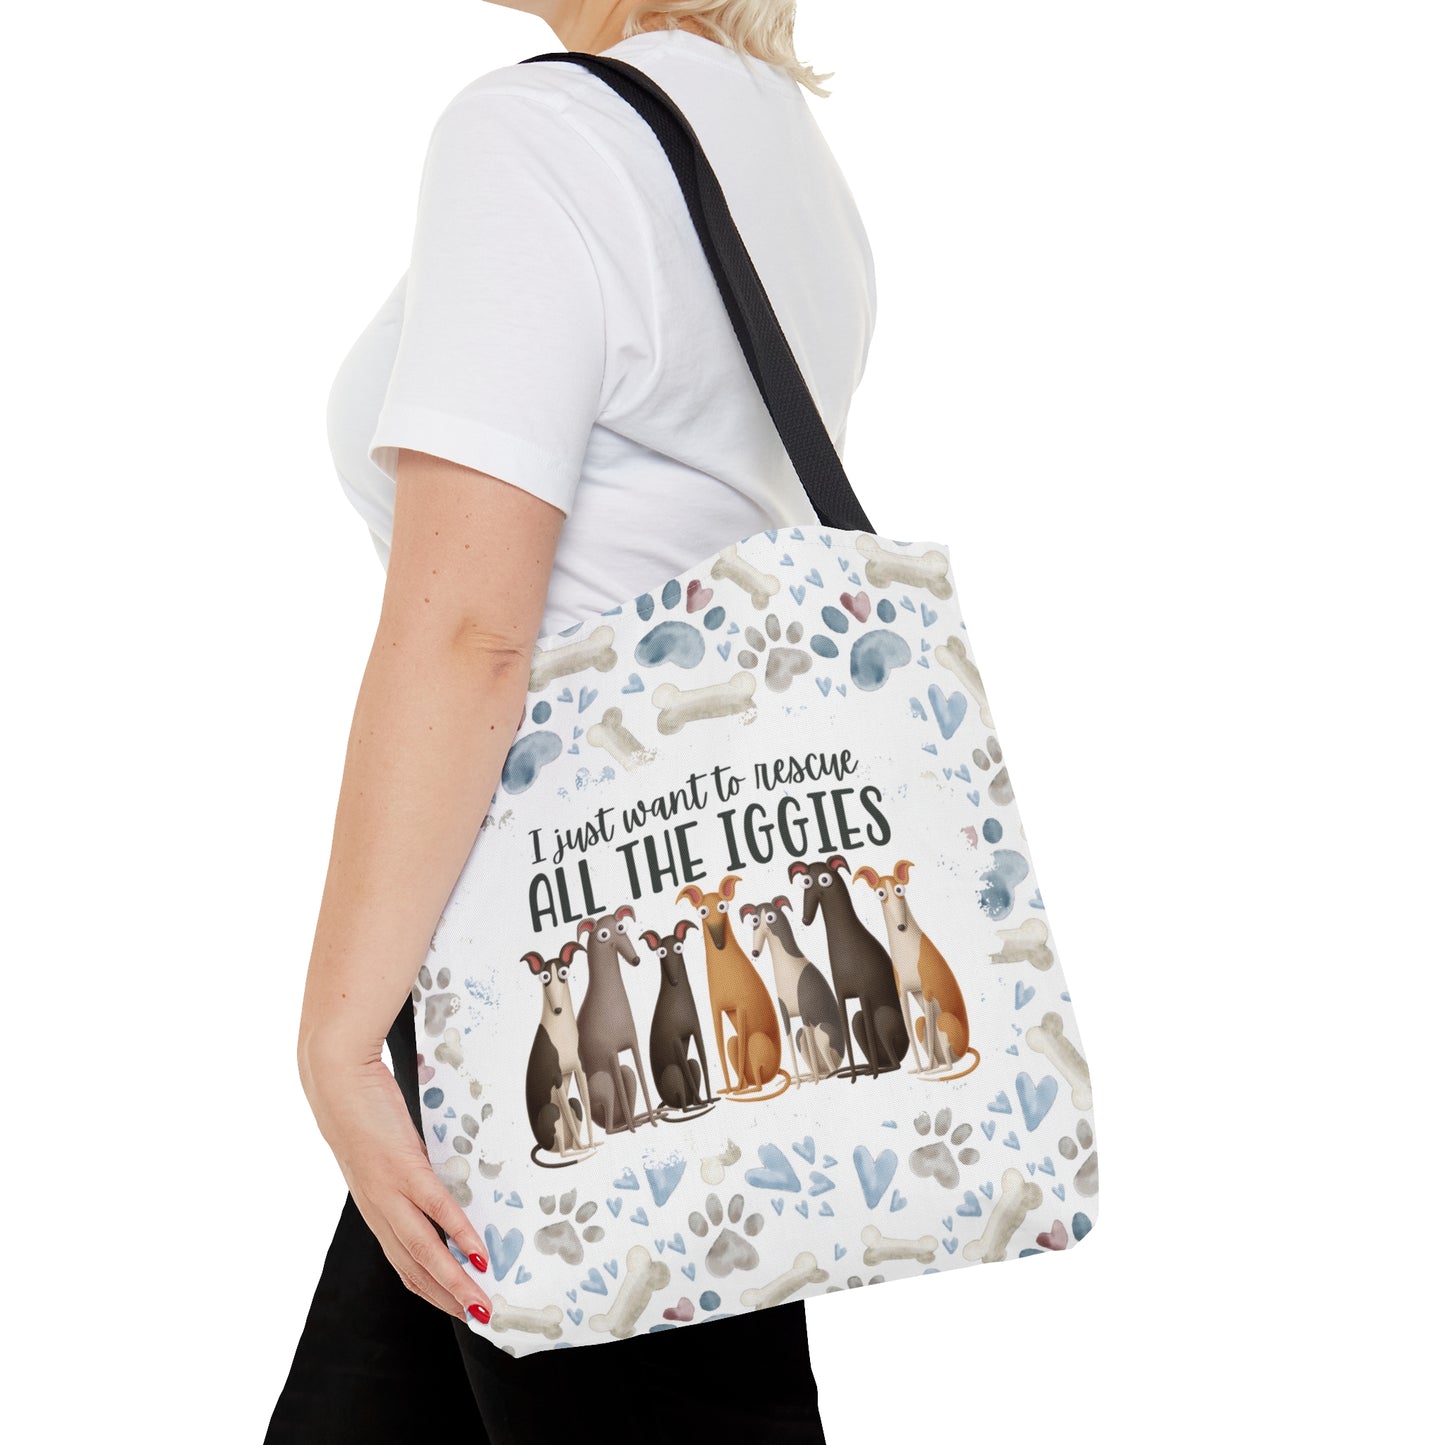 I Just Want To Rescue All The Iggies Italian Greyhound Tote Bag